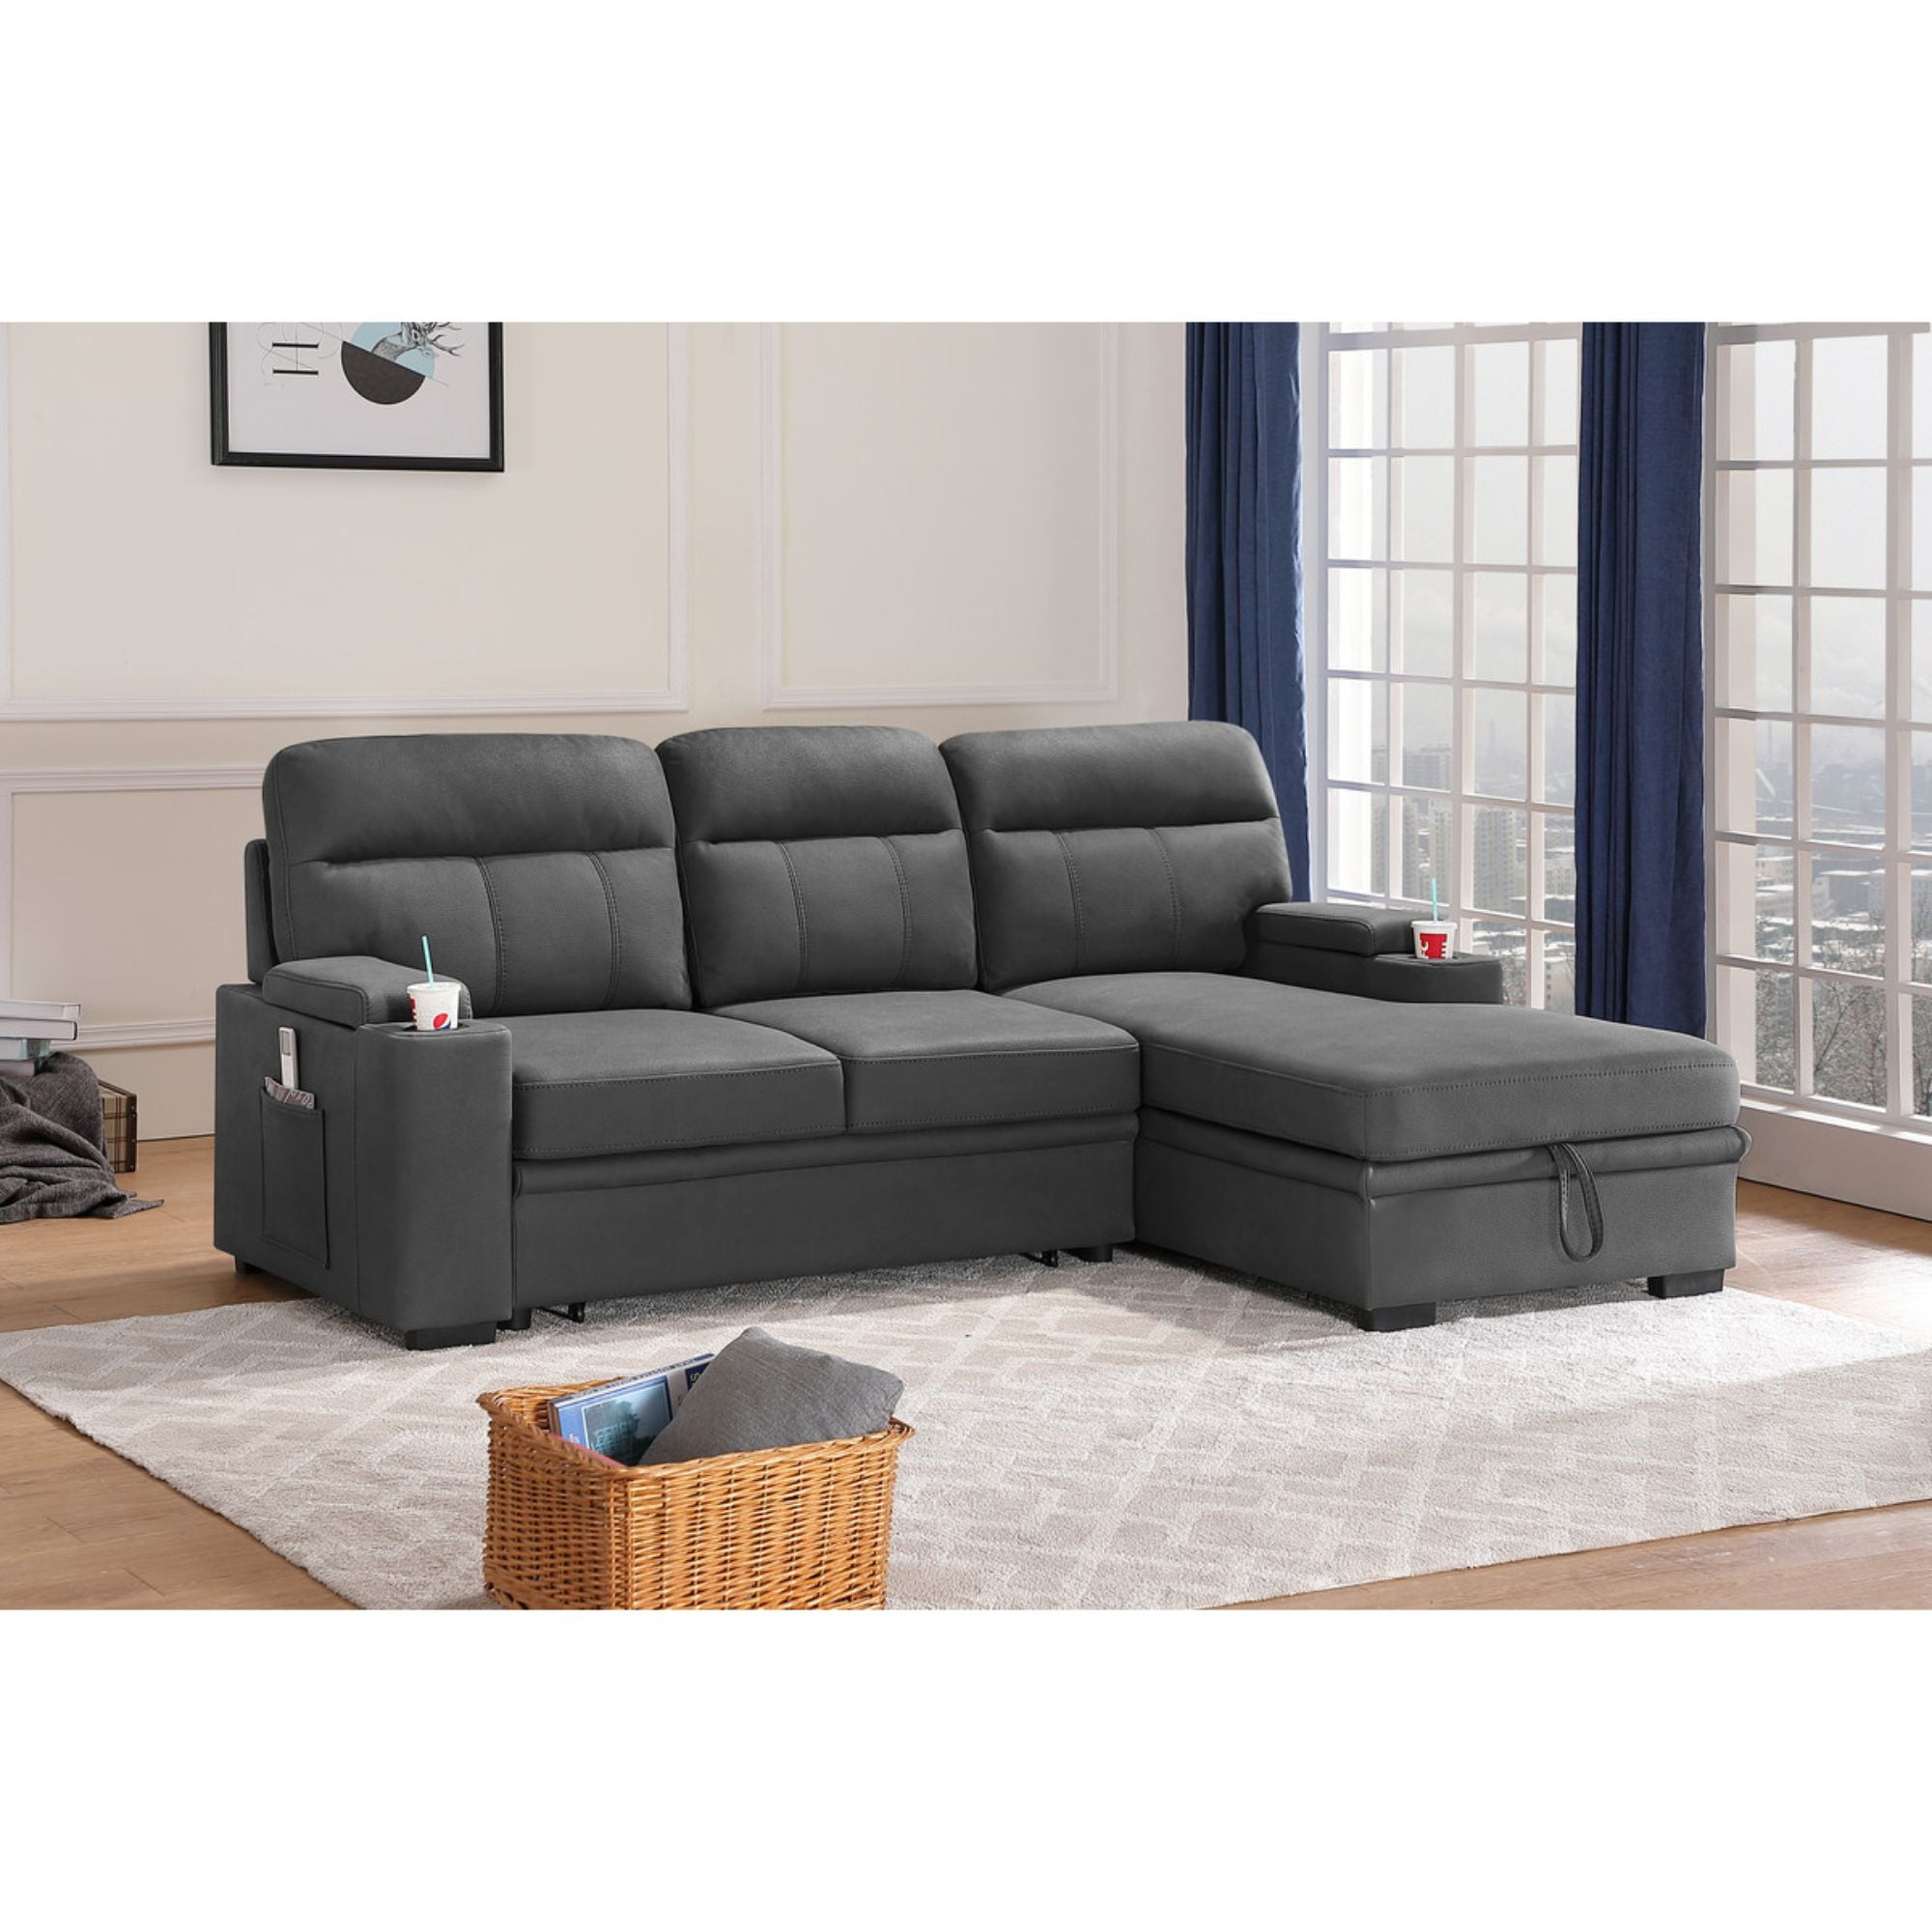 Modern Reversible Sleeper Sectional Sofa Storage Chaise Fabric Faux Leather Gray 